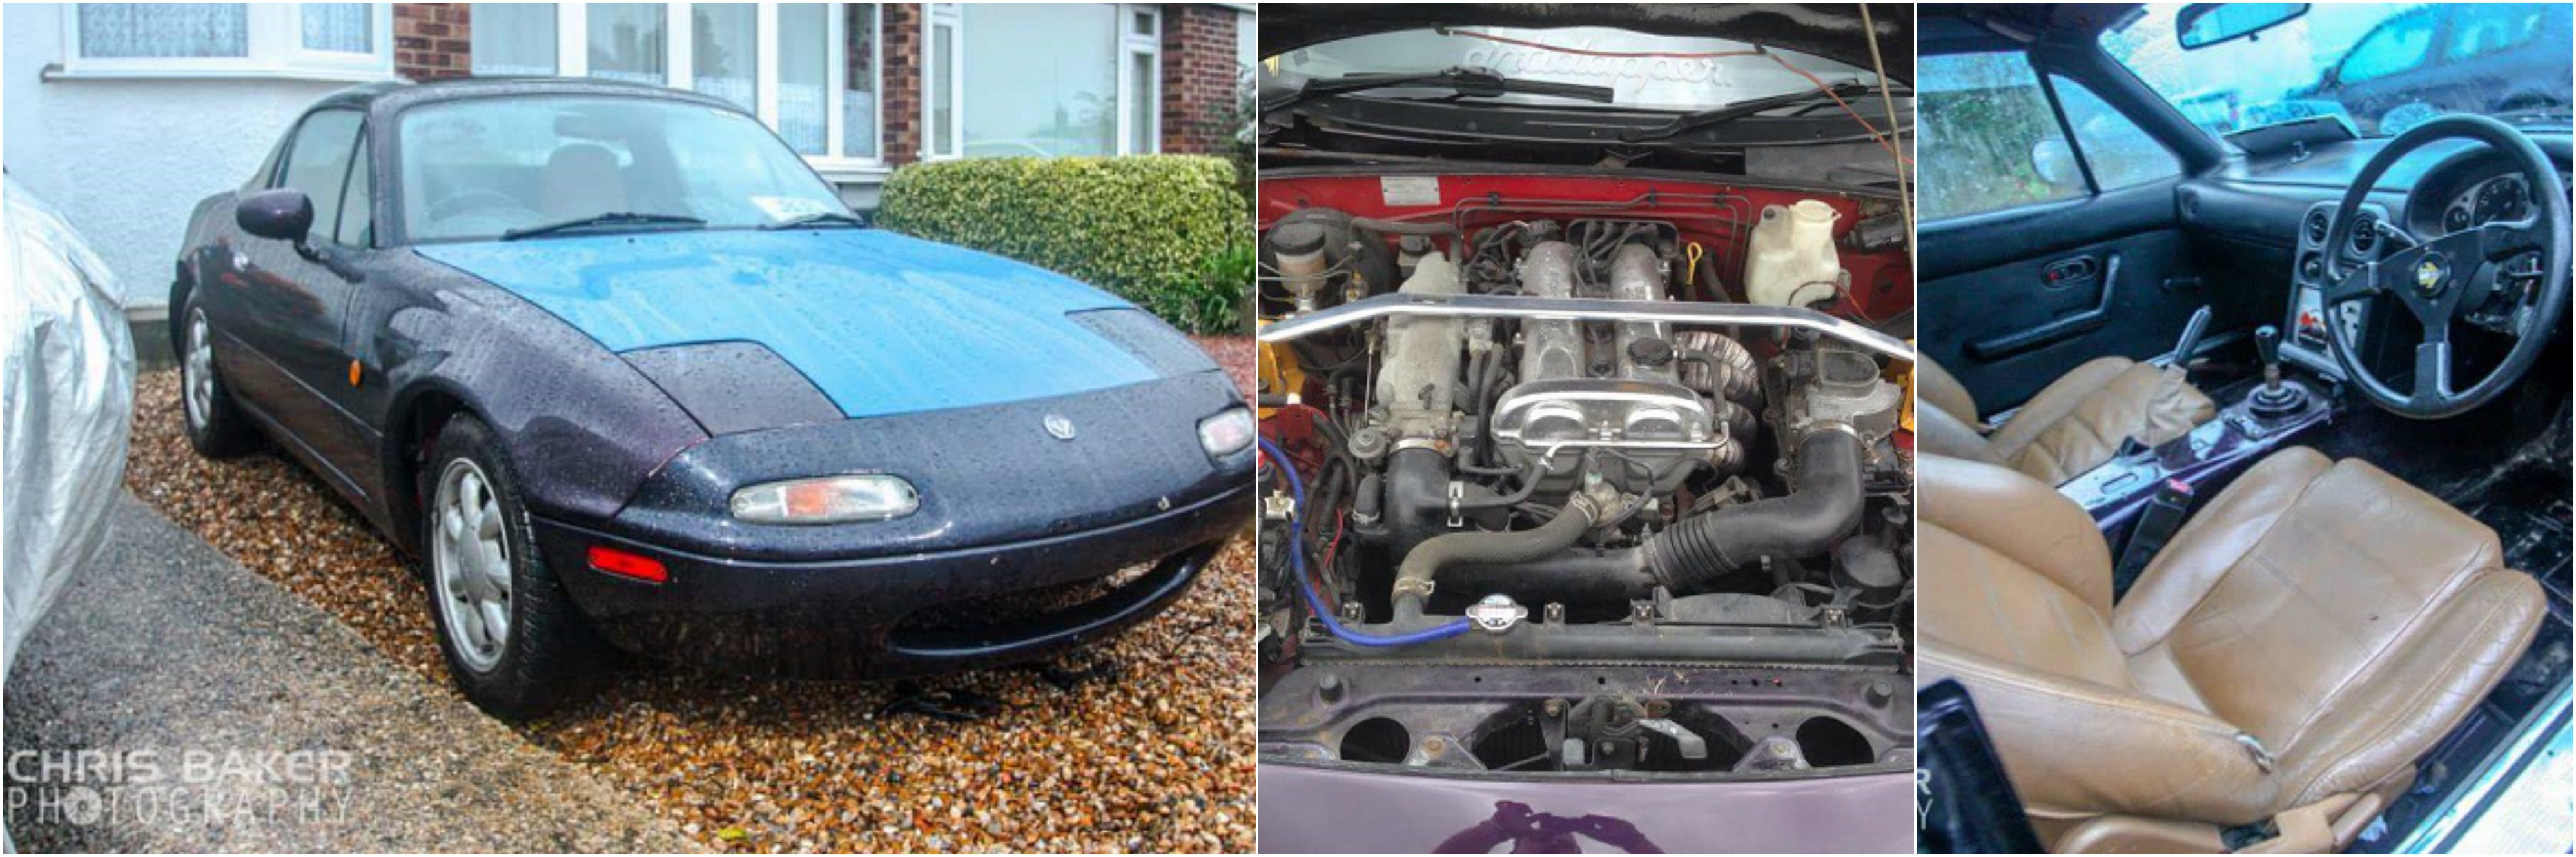 Eunos - modified cars - before